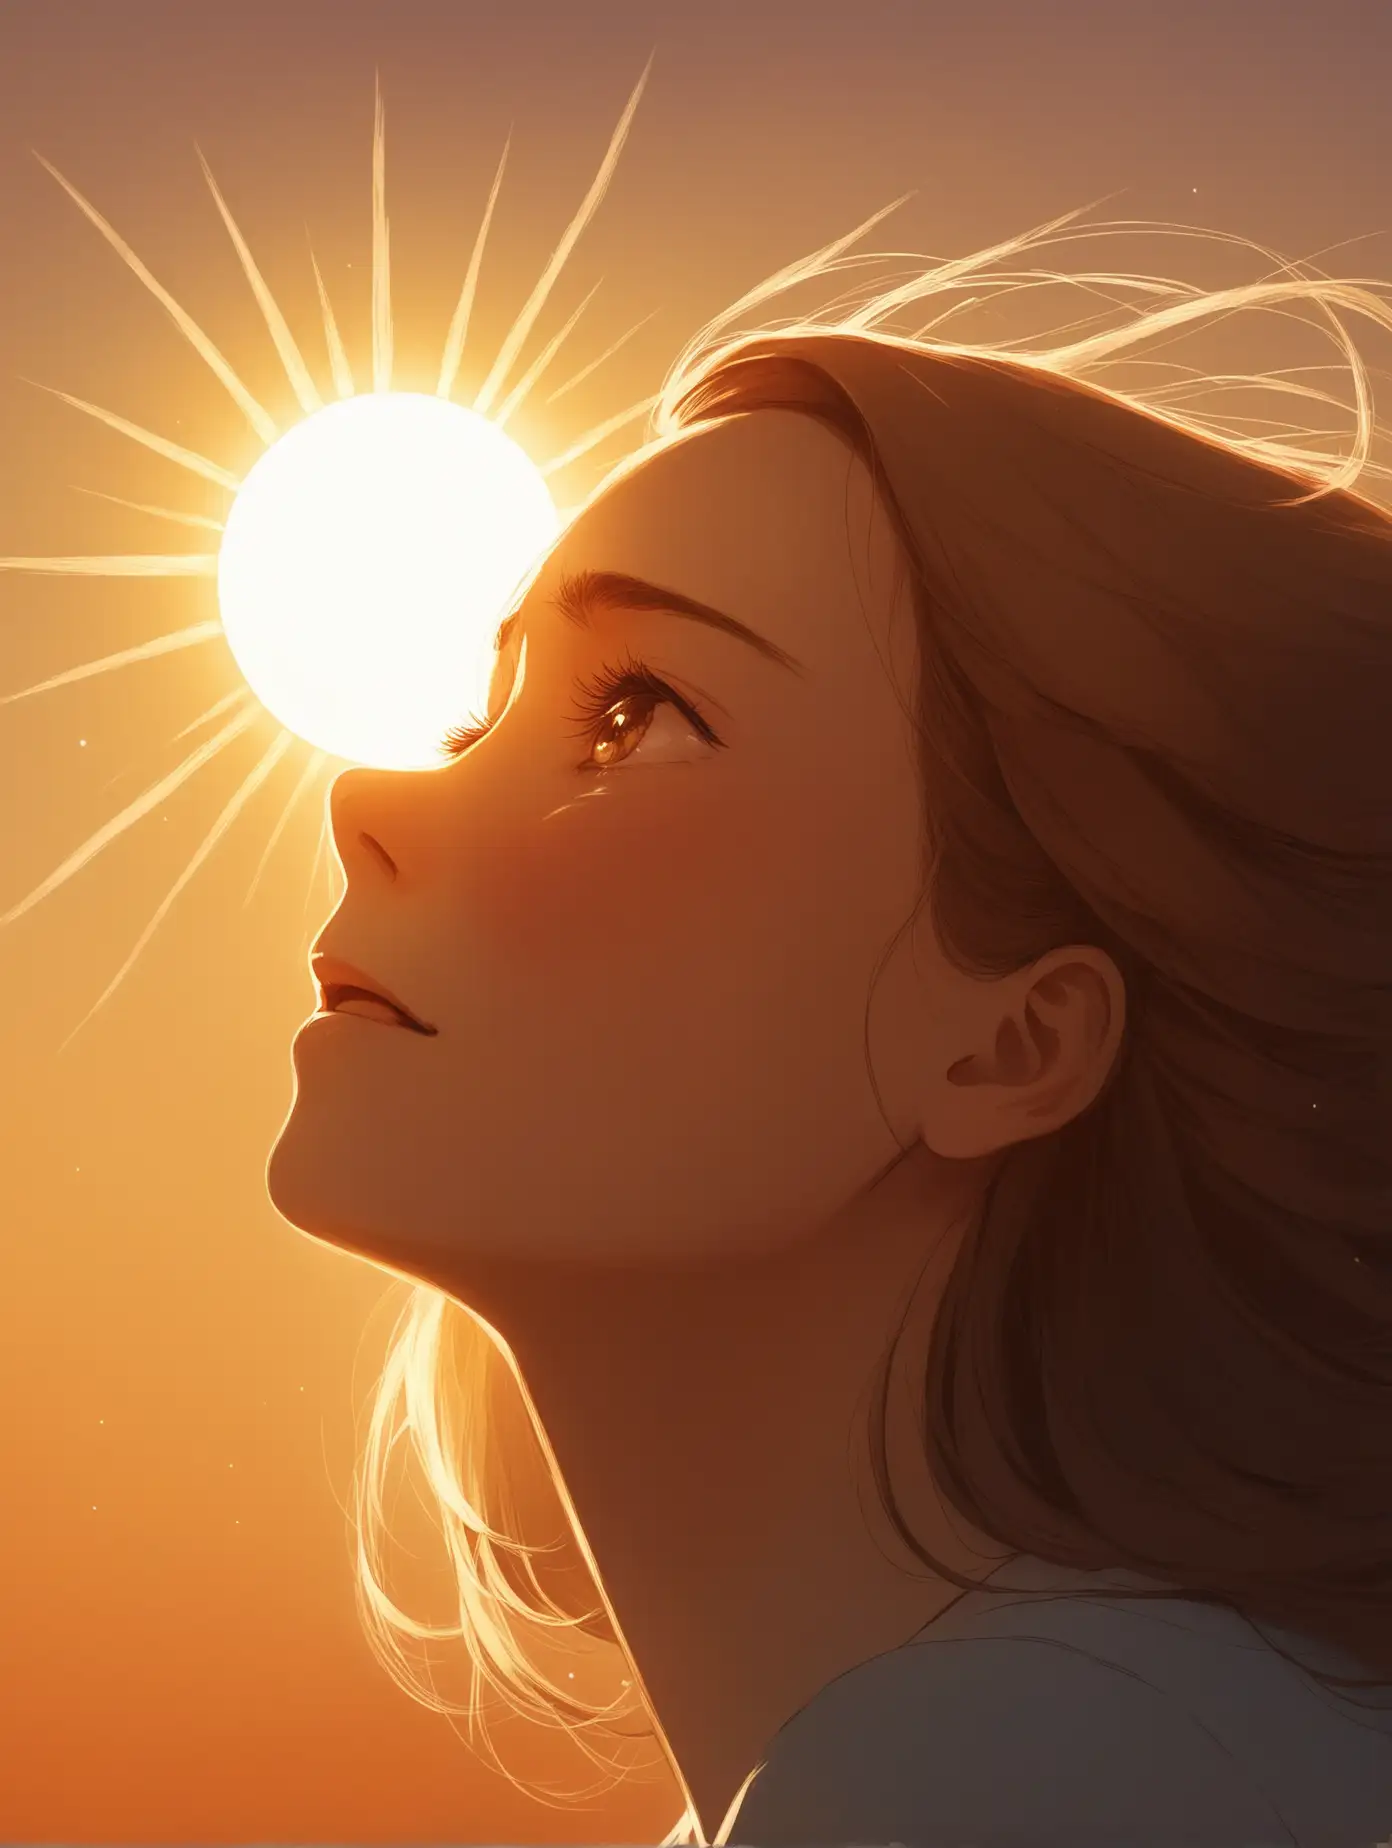 A woman looking at the sun very emotionally 